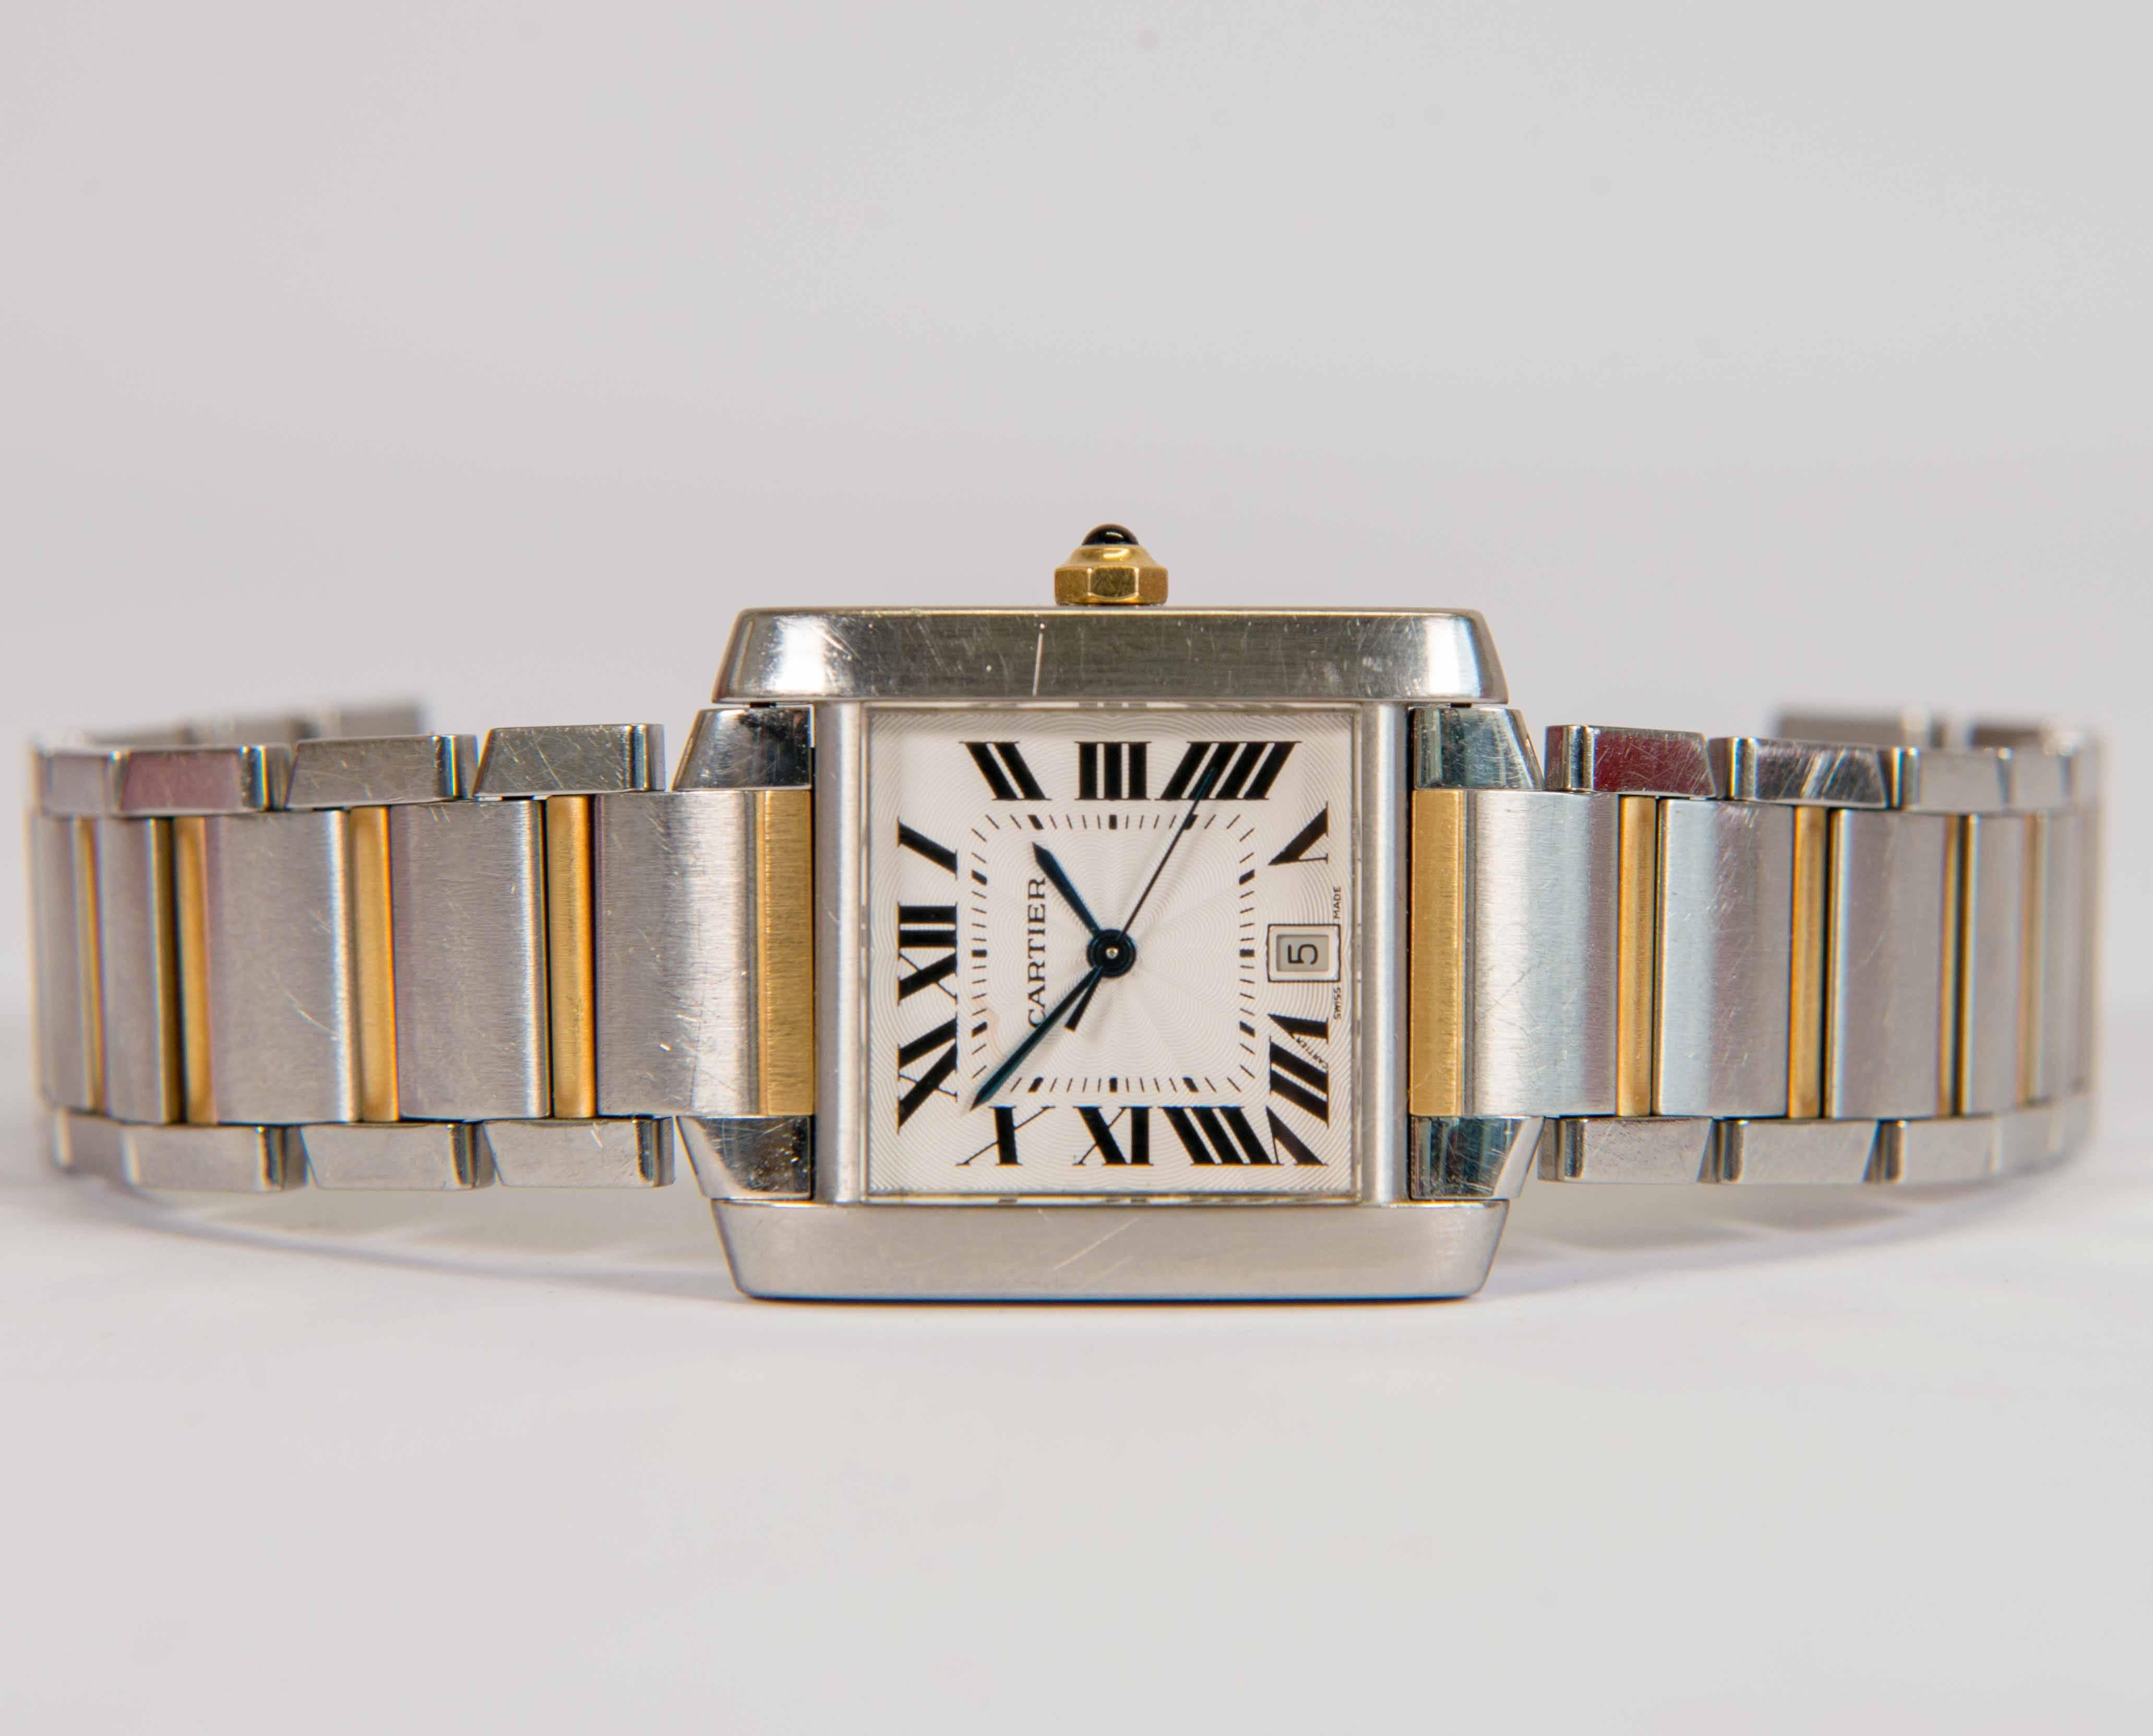 Swiss Cartier Tank Francaise, Two-Tone Men's Dress Watch with Guilloché Dial and Gold